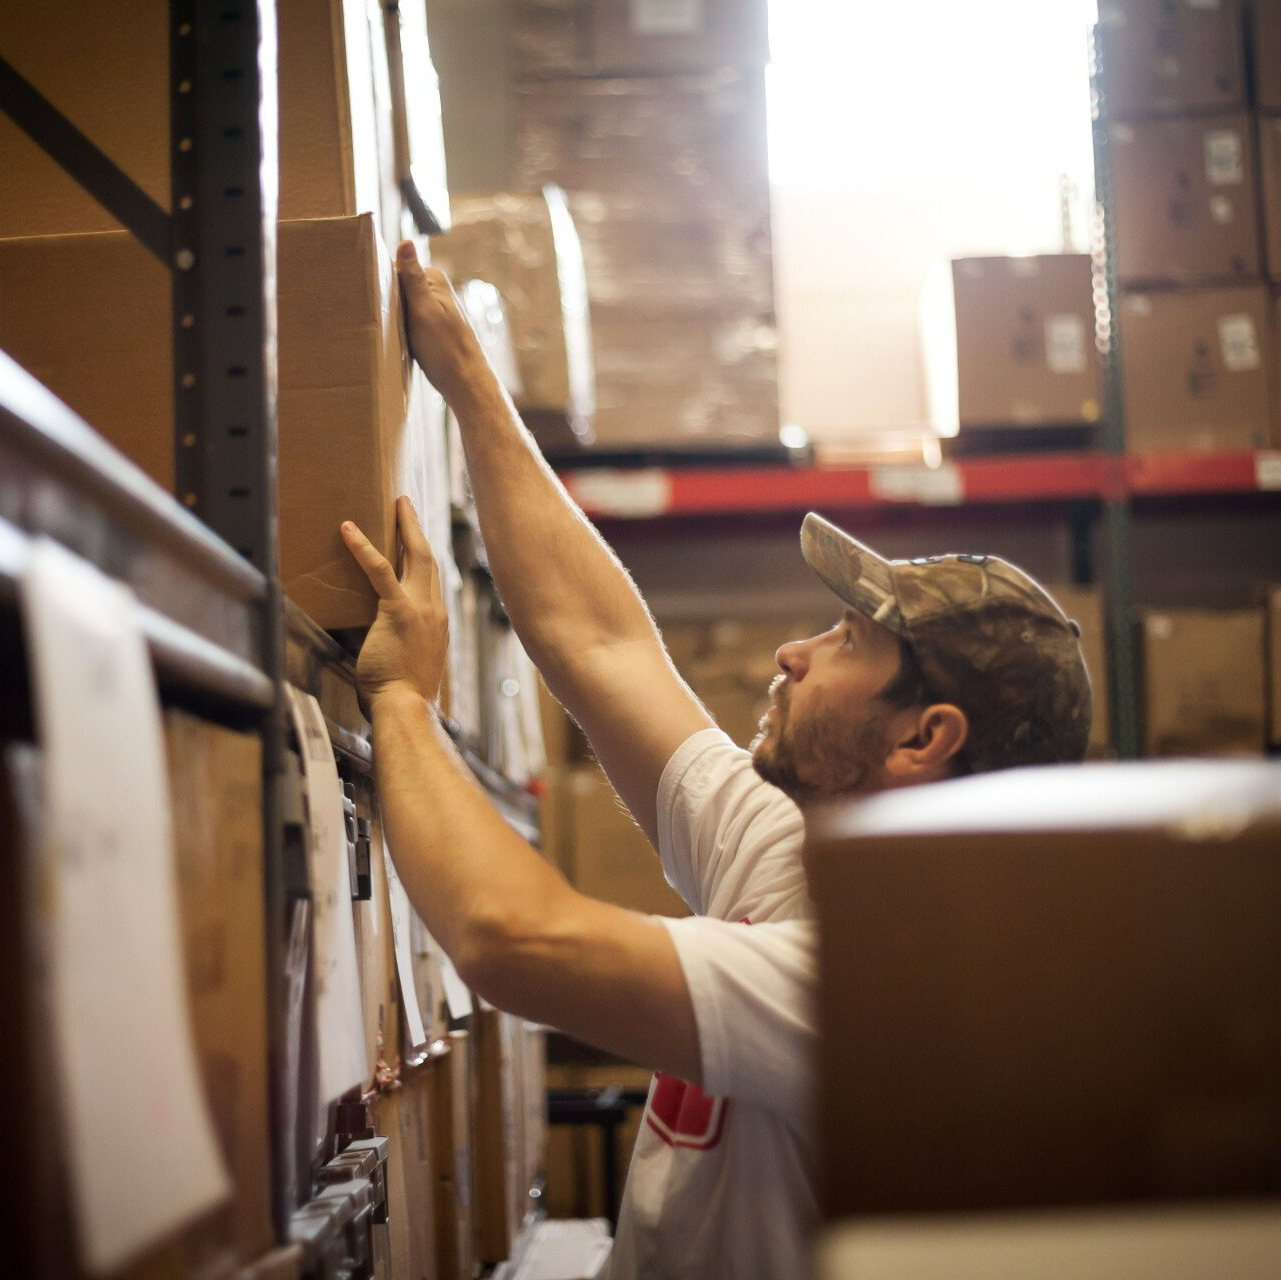 worker reaching for a cardboard box stored in the warehouse